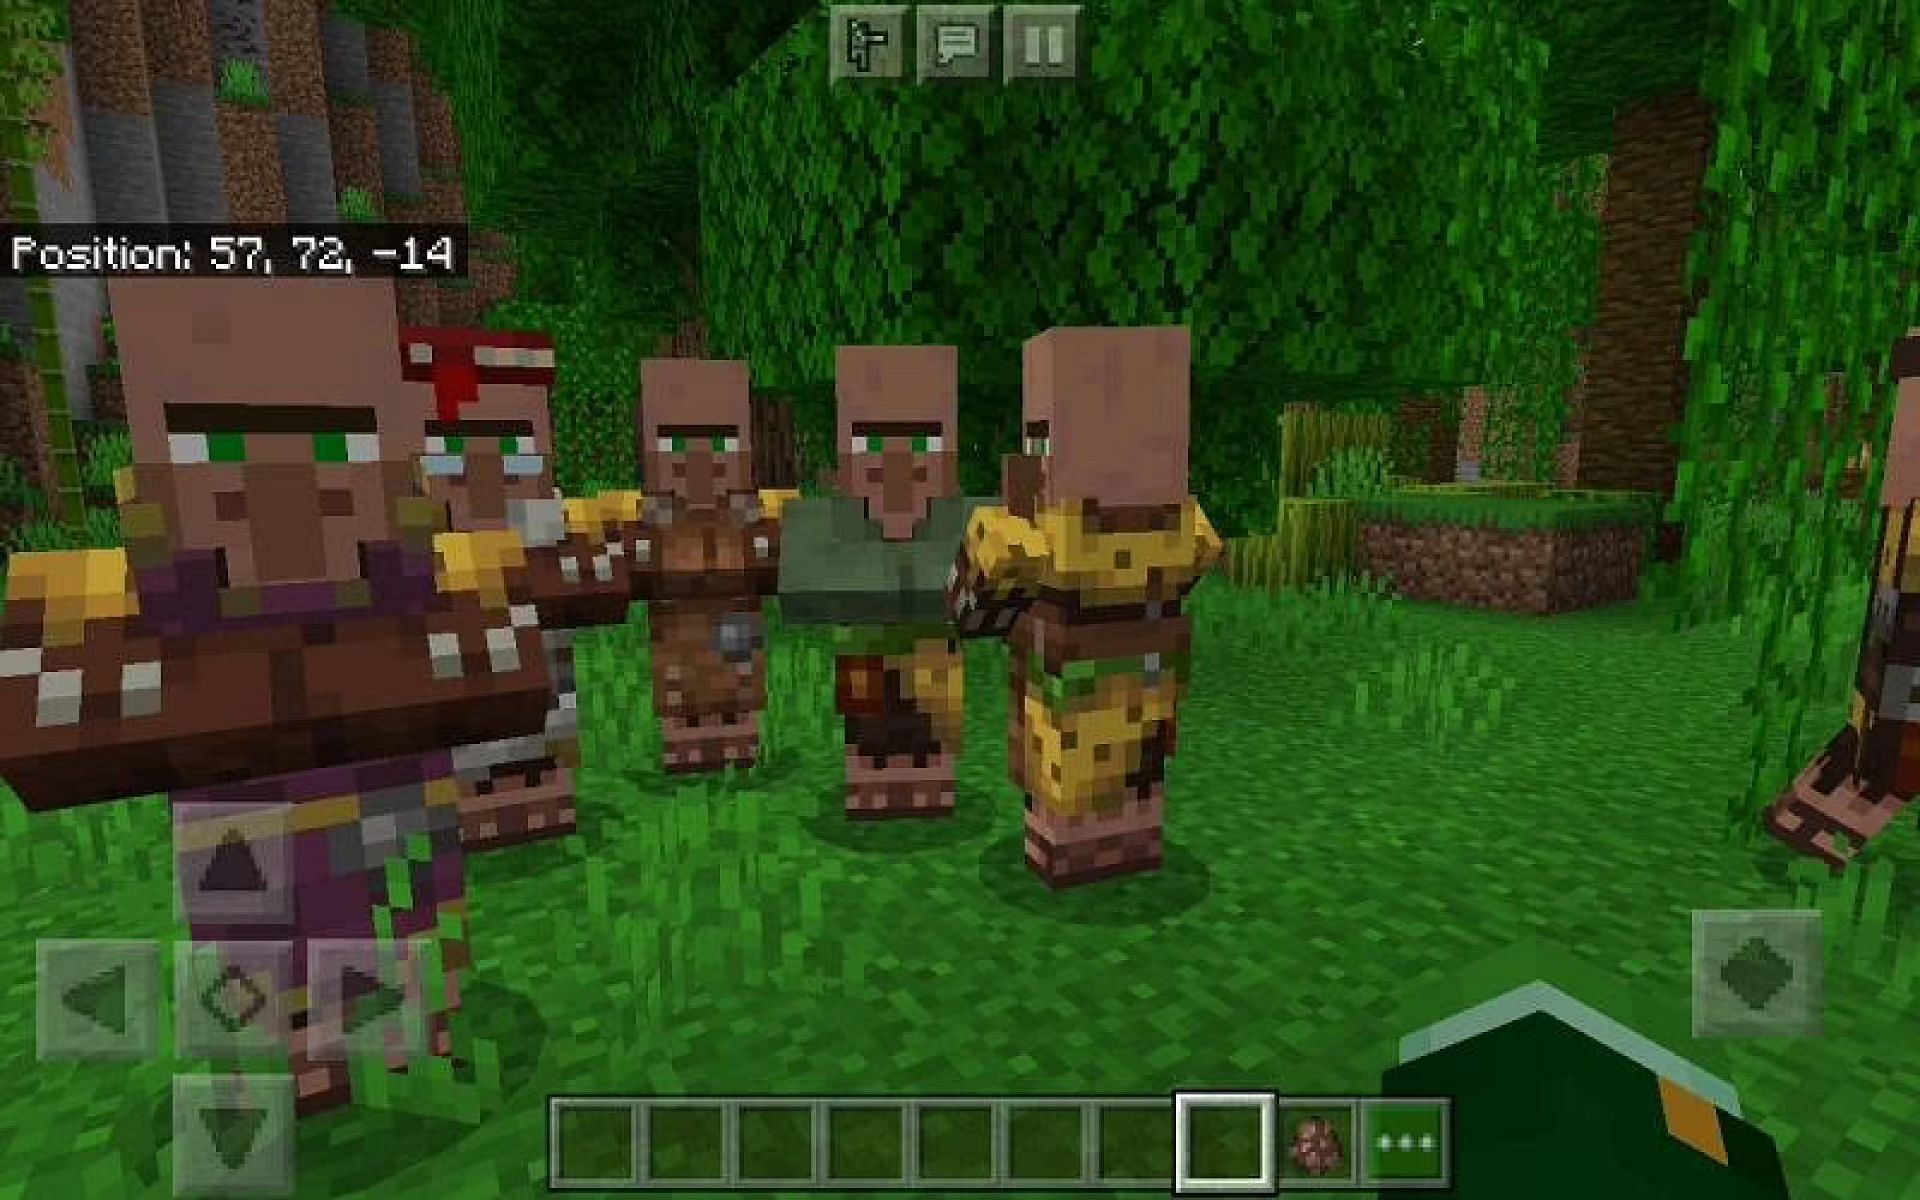 An image of several jungle villagers in-game (Image via Minecraft)